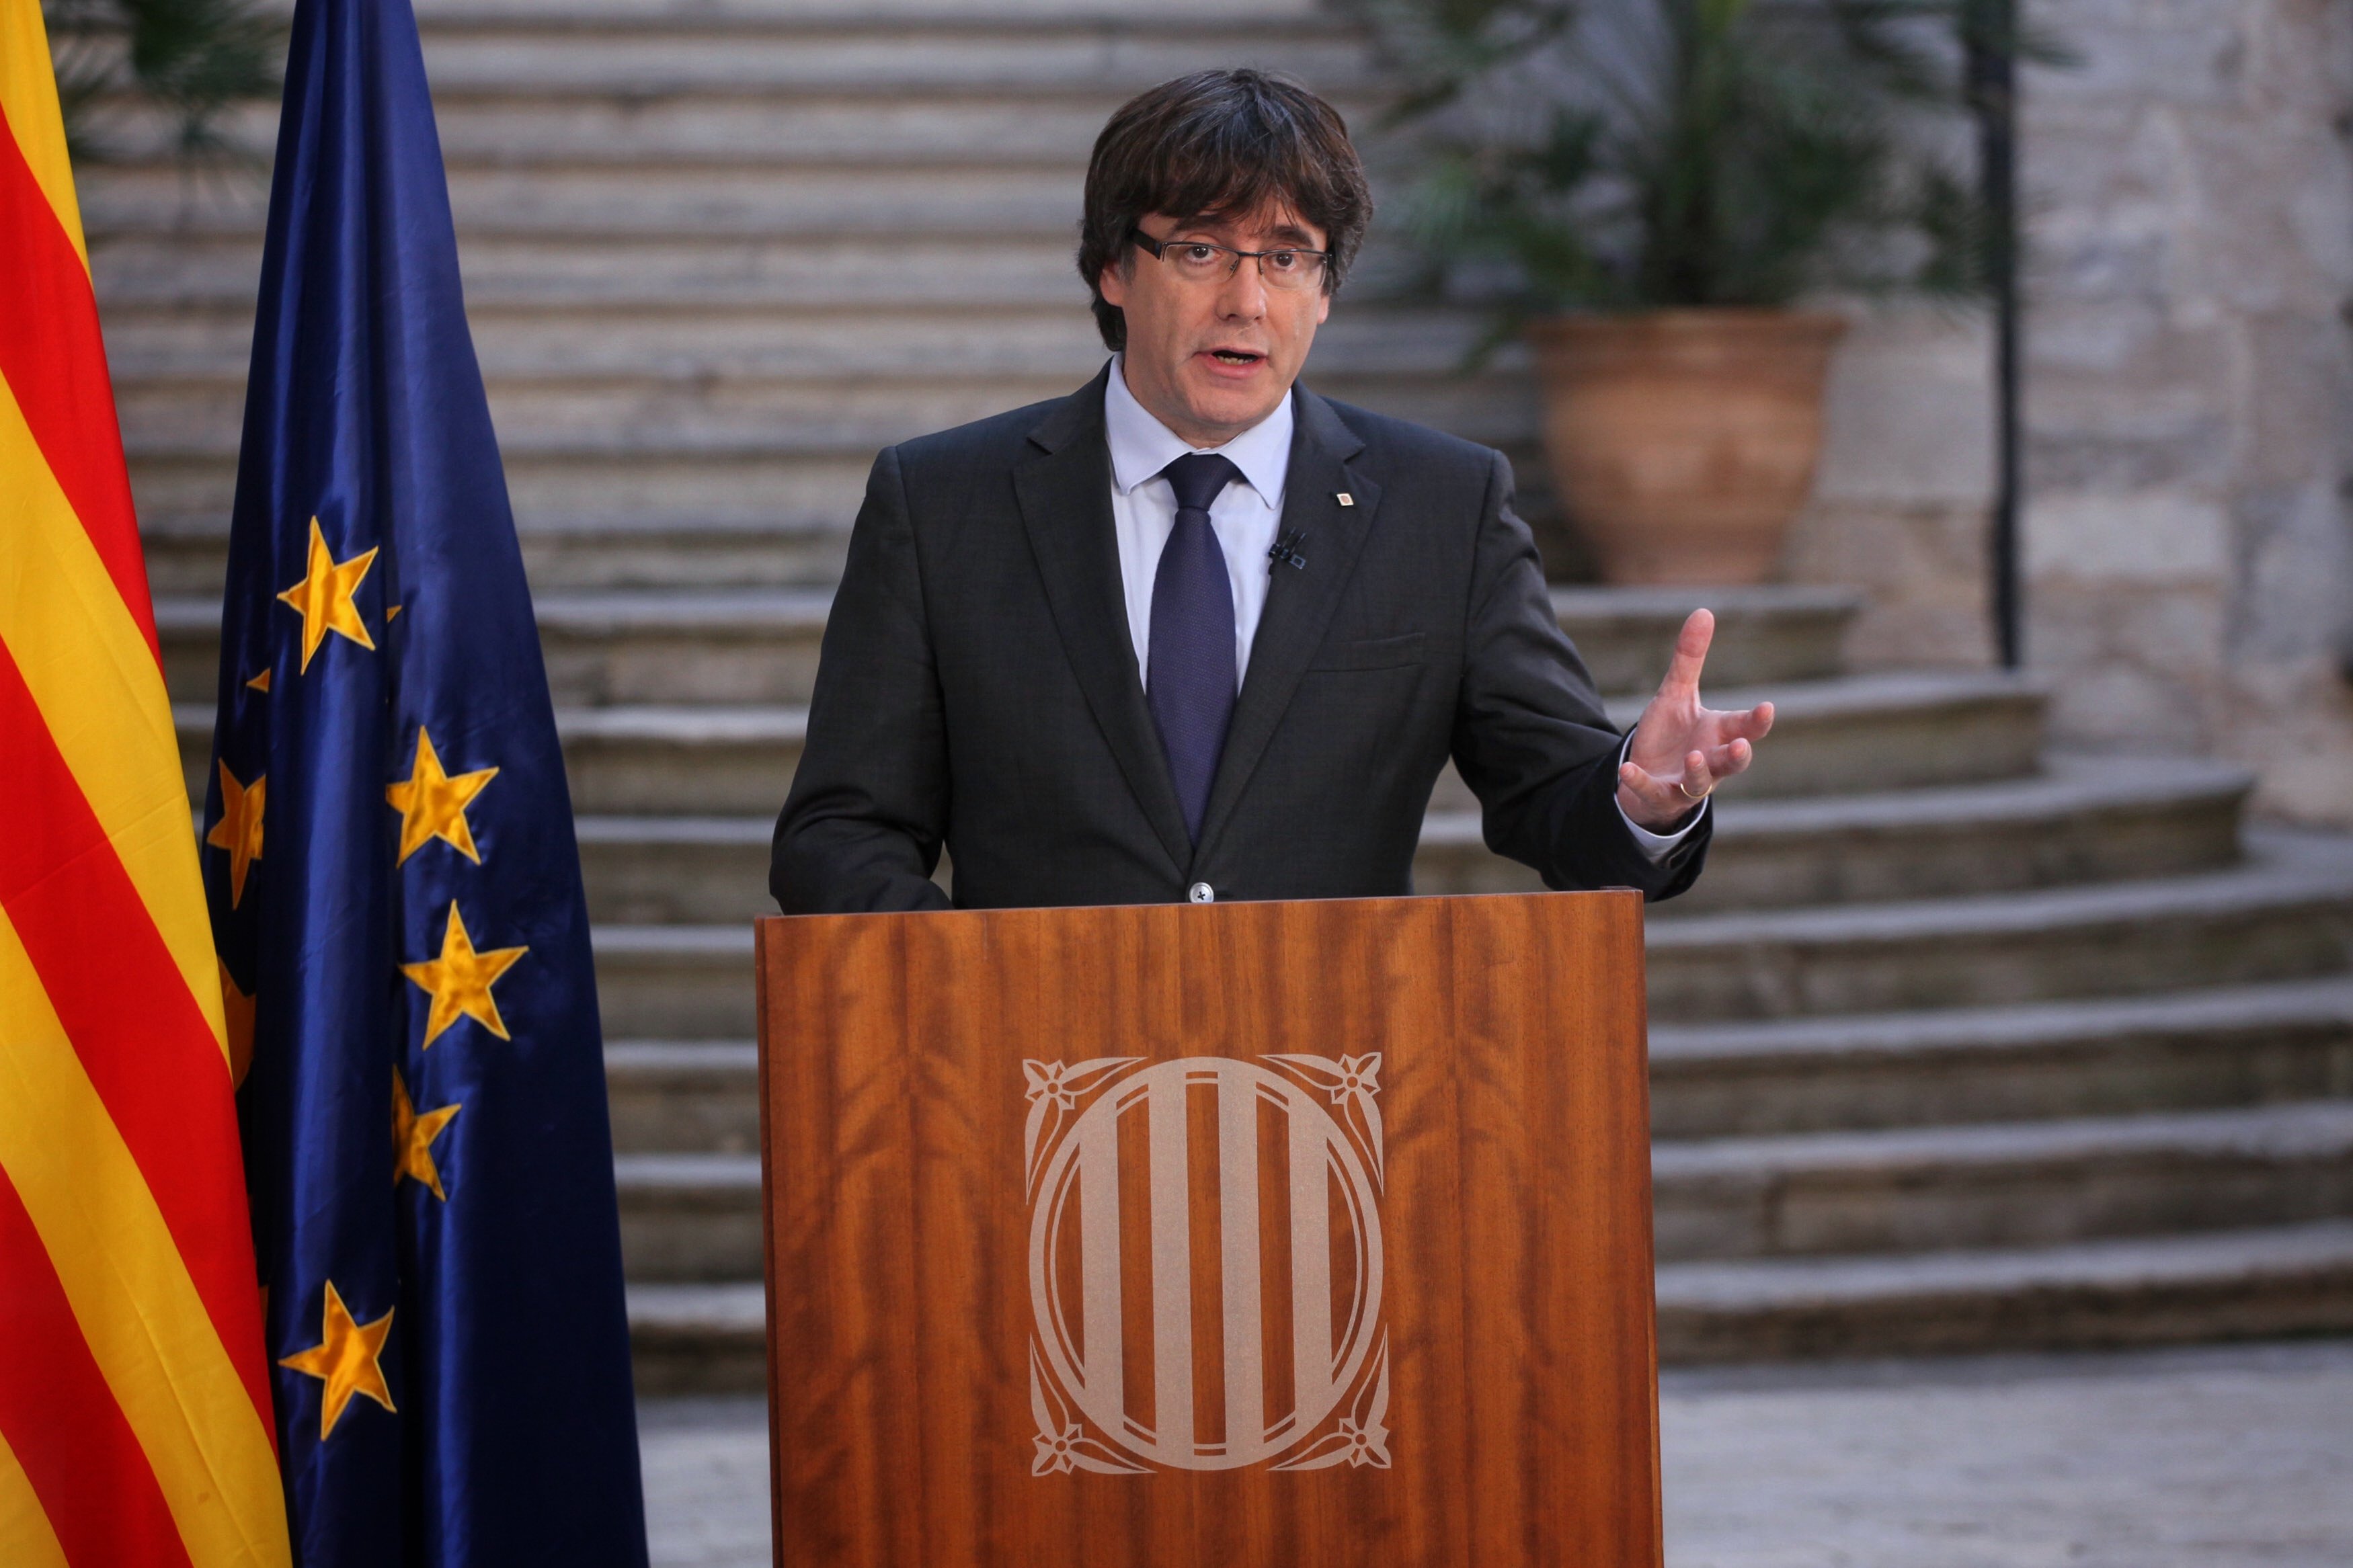 Puigdemont, continuing normally as president, calls for democratic opposition to 155